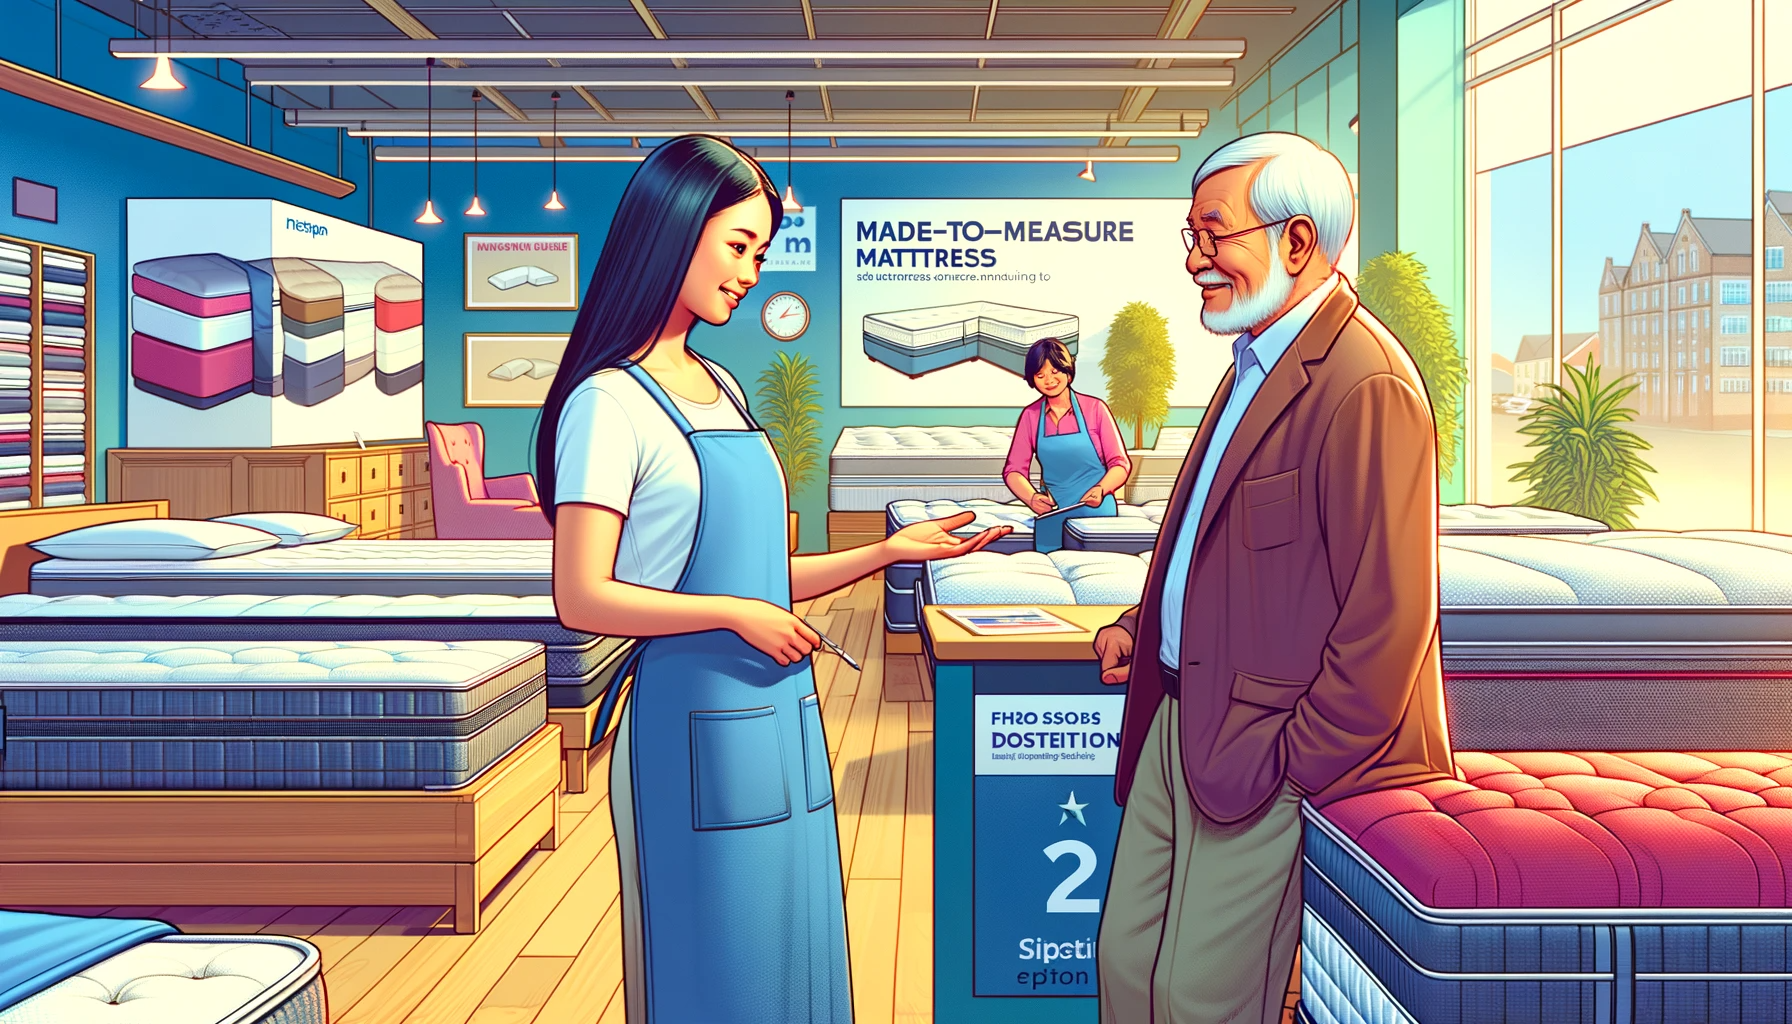 A vibrant image depicting a customer exploring options in a made-to-measure mattress store in the UK. The scene should show a diverse range of mattresses on display, with a knowledgeable salesperson (a young Asian woman) assisting a customer (an elderly Hispanic man). The store environment is welcoming and professional, filled with signage and displays that showcase various custom mattress options, highlighting the experience of shopping for a made-to-measure mattress in a specialized UK store